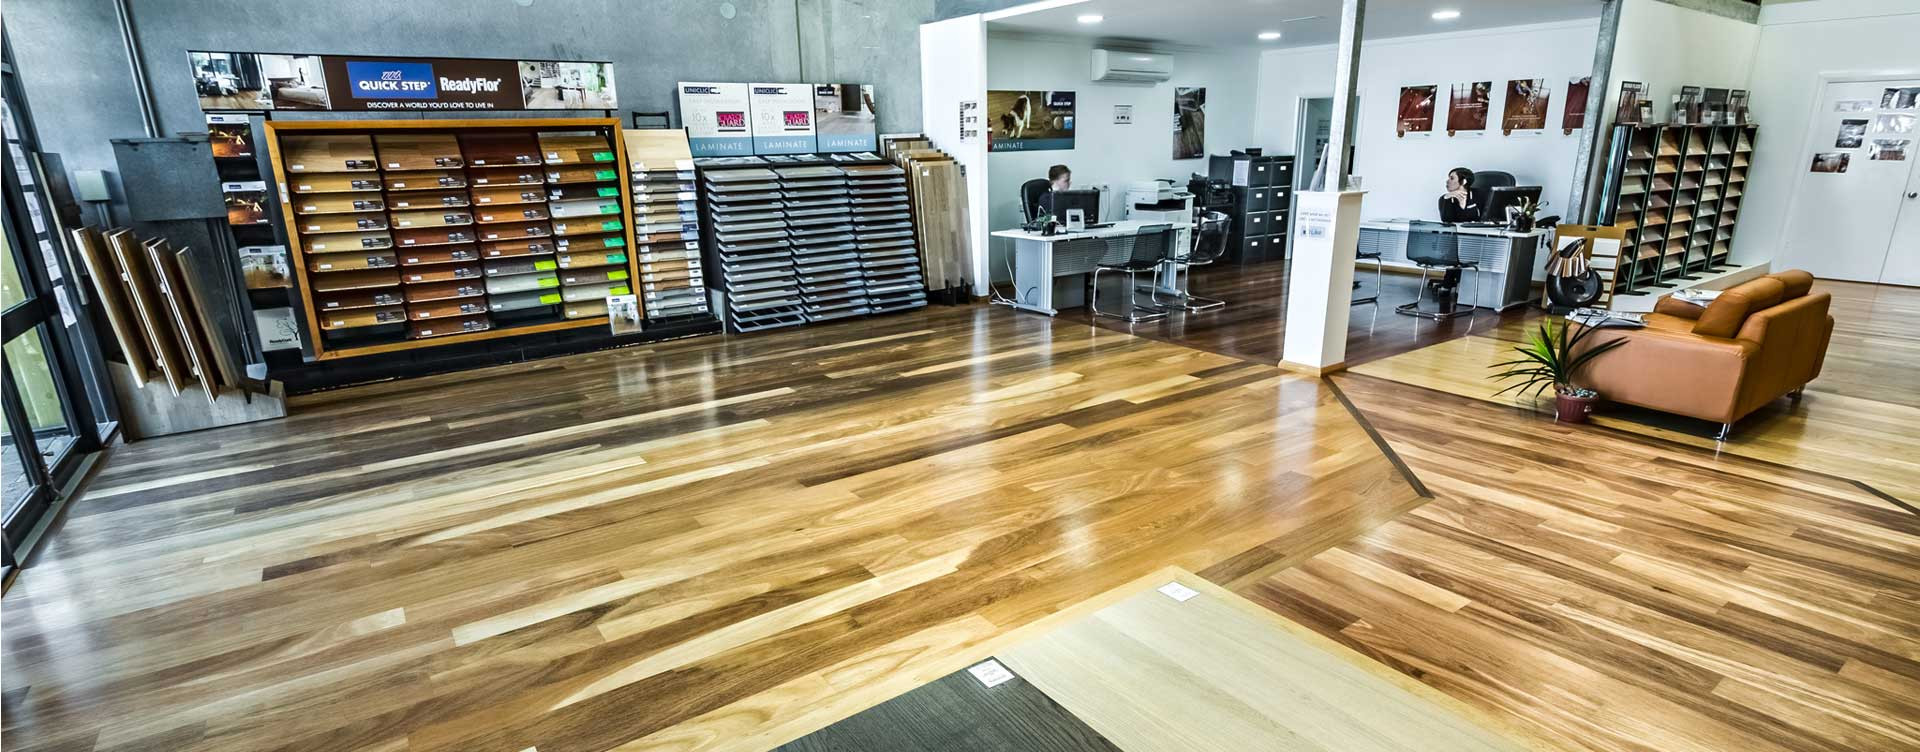 oak hardwood flooring for sale of timber flooring perth coastal flooring wa quality wooden with thats why they call us the home of fine wood floors